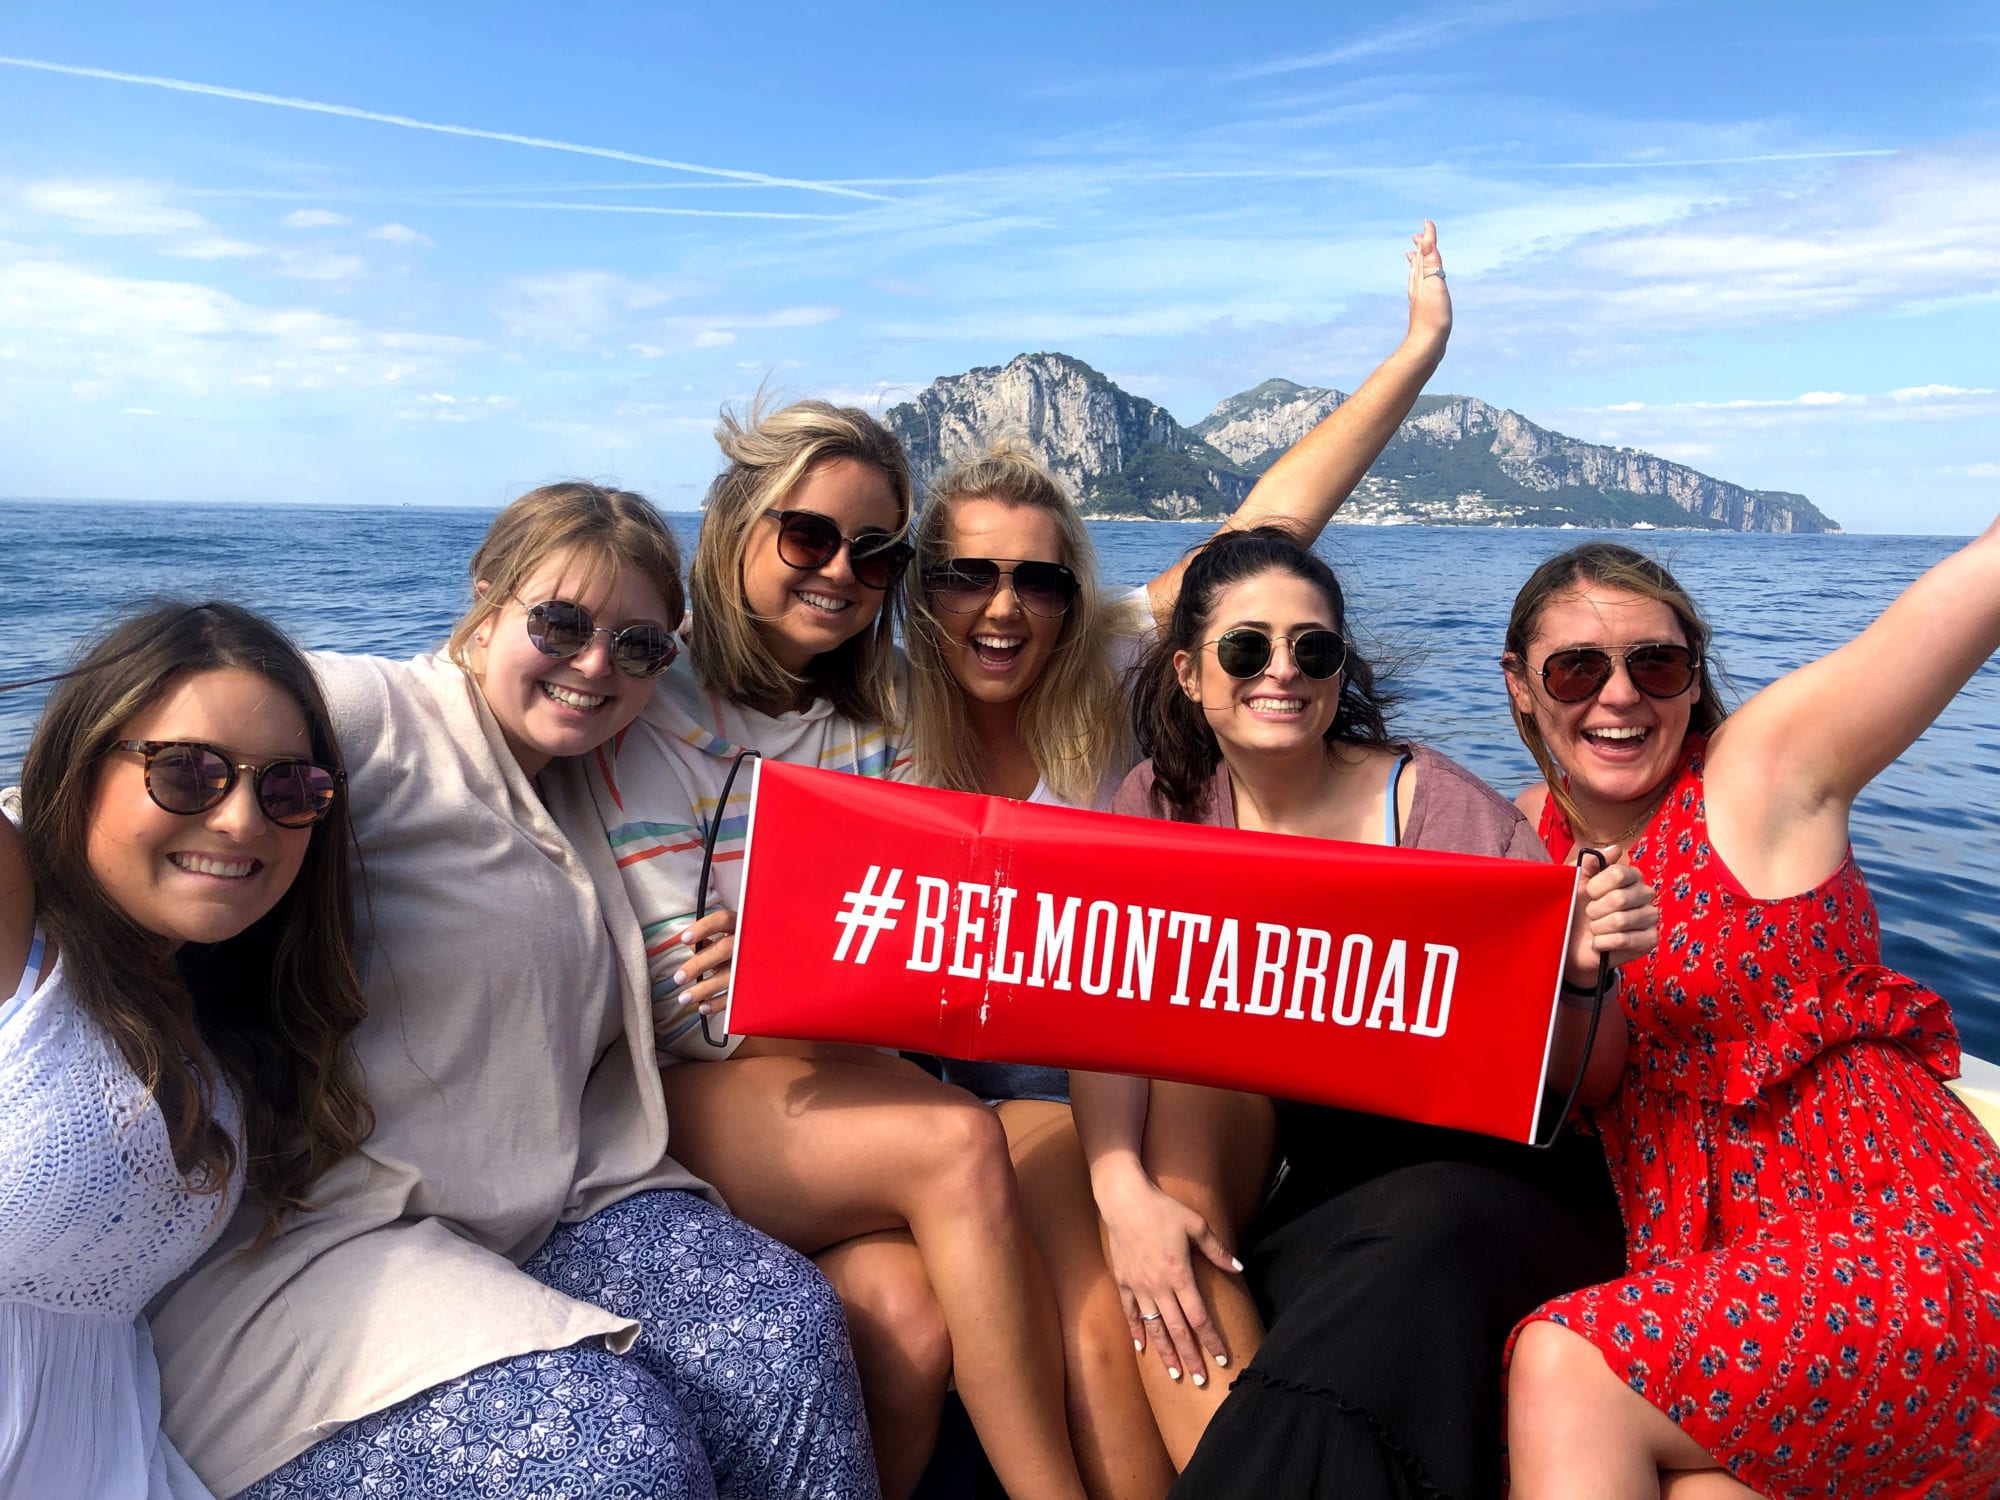 Belmont students on a boat in the Mediterranean